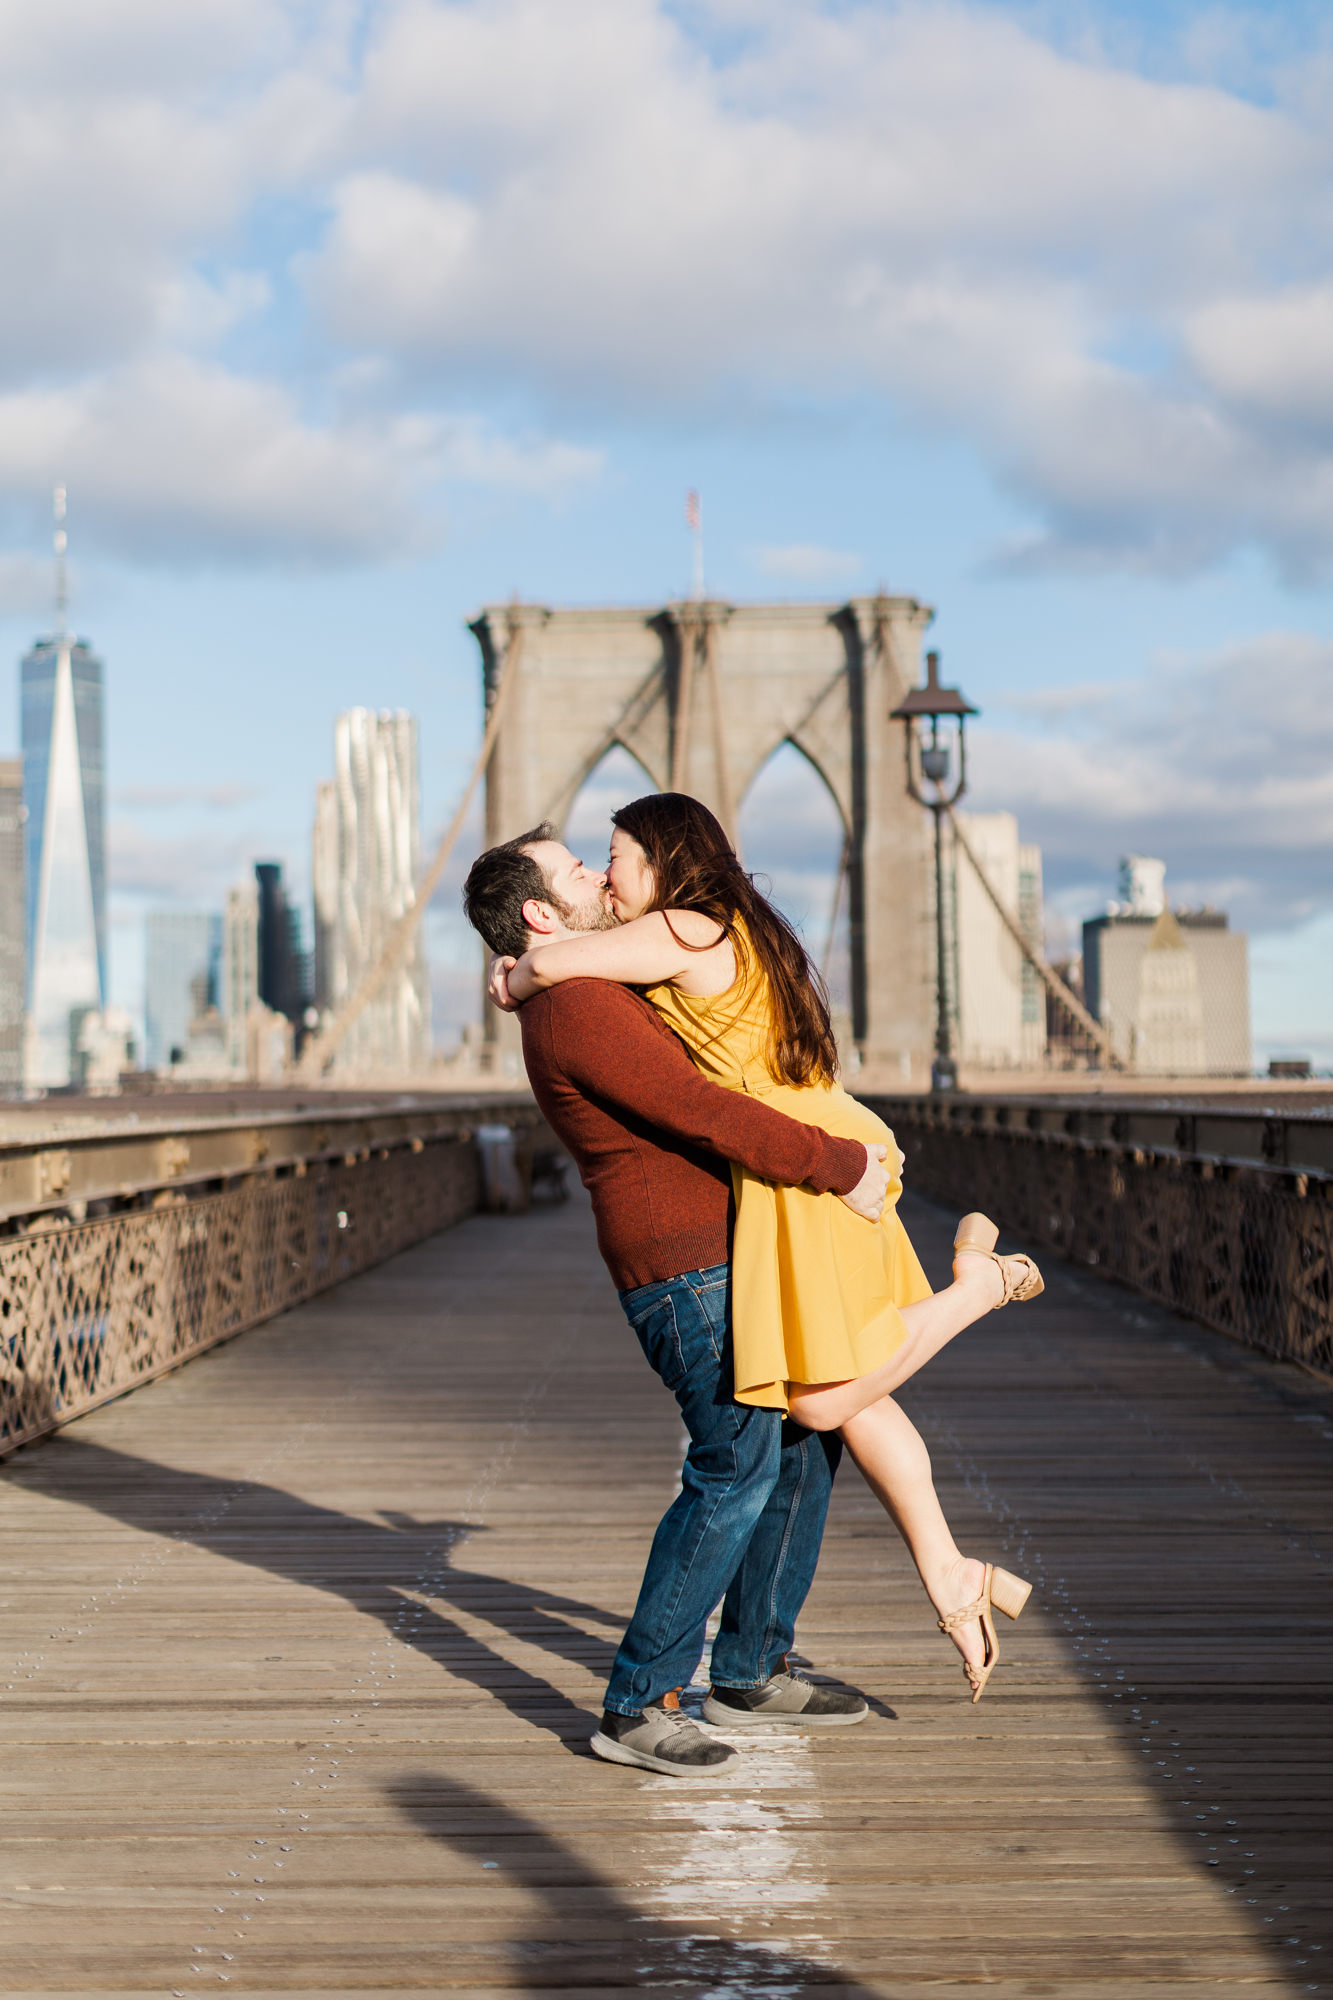 Romantic Brooklyn Bridge Engagement Photography with Matching Outfits